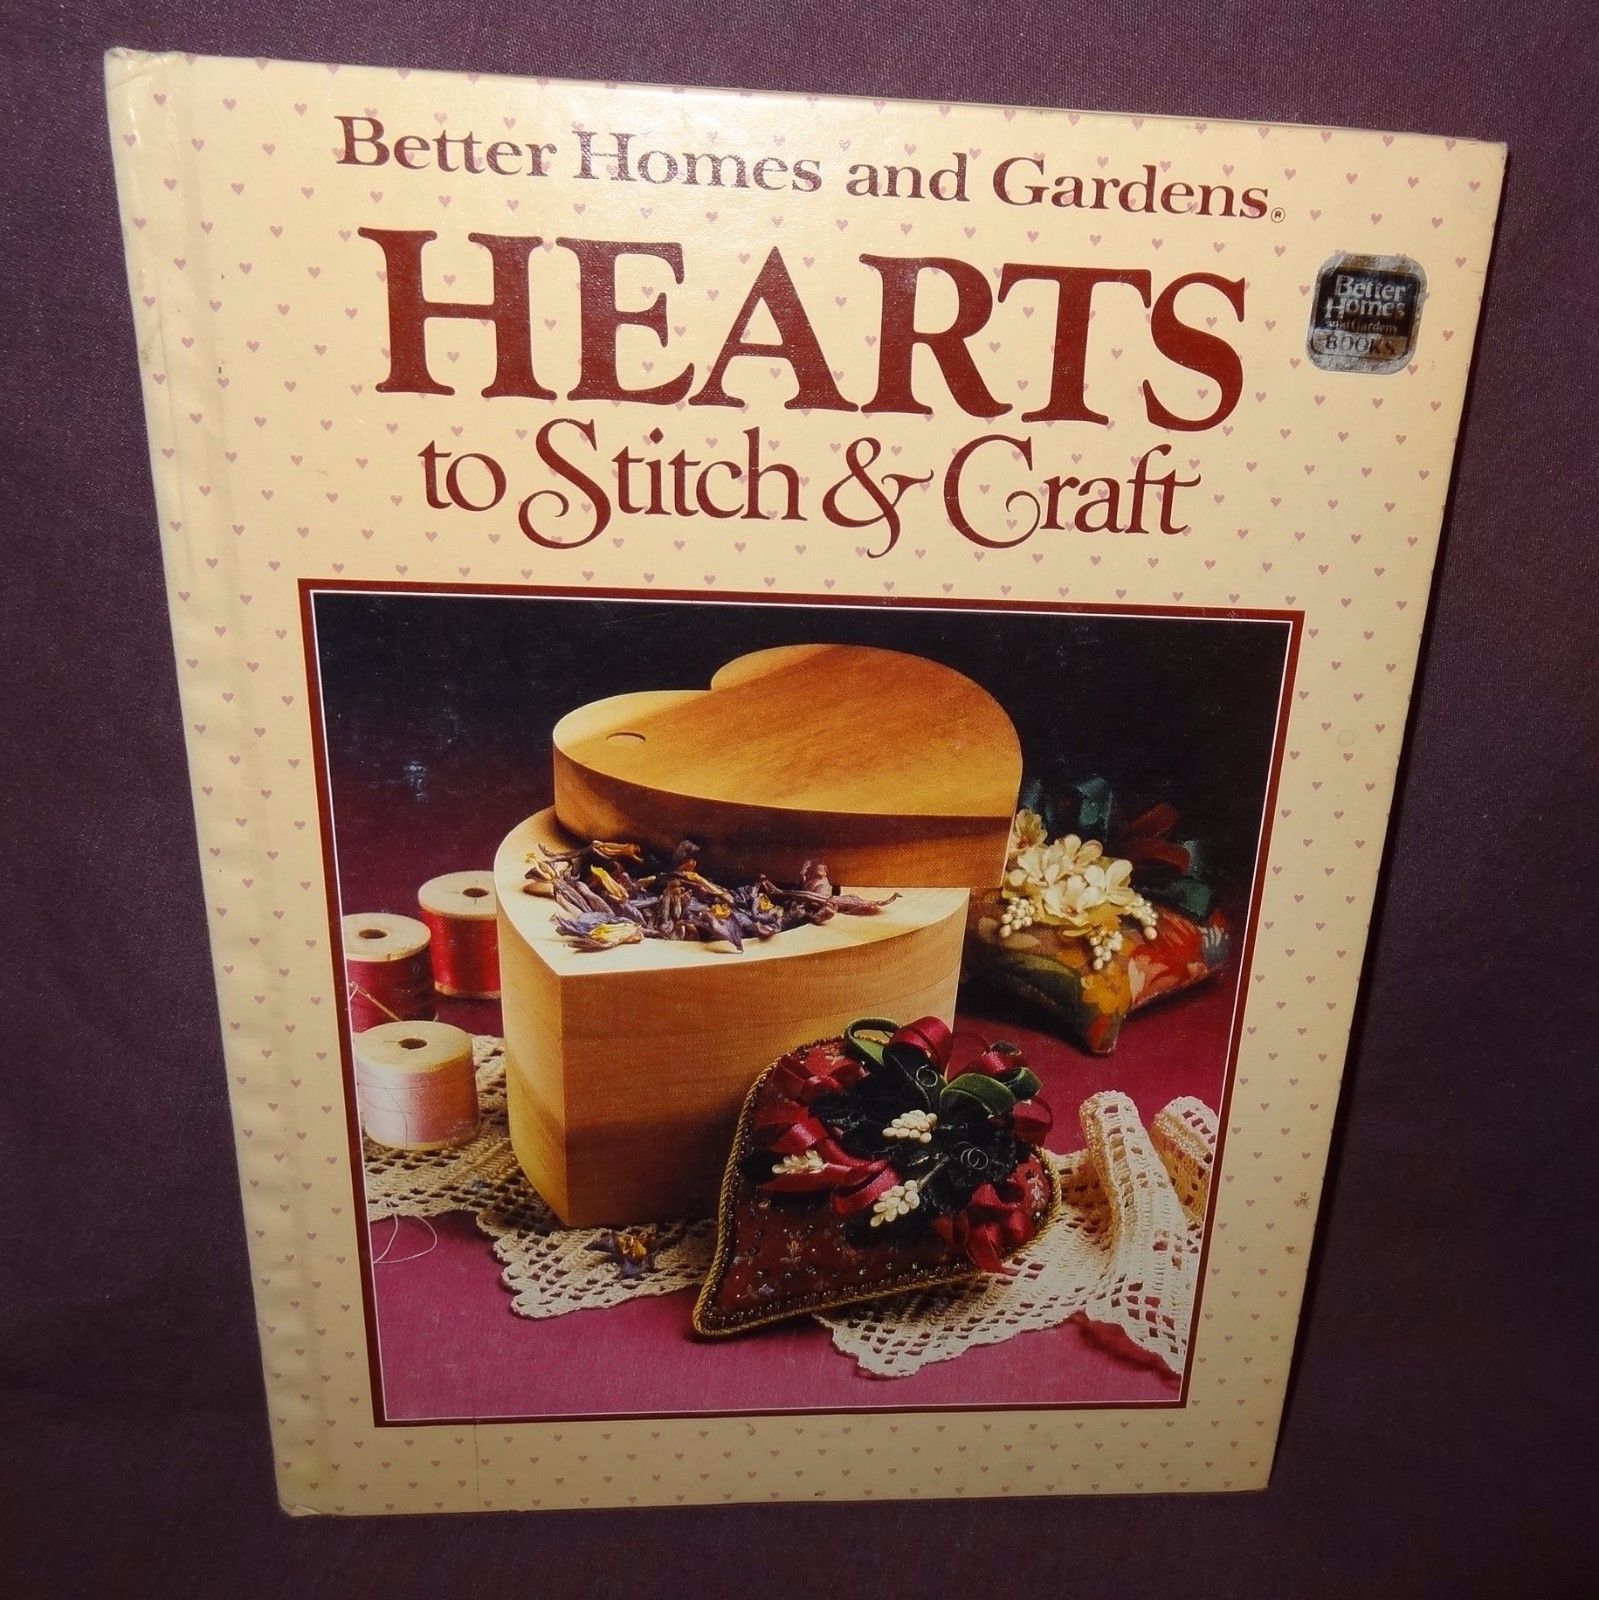 1984 Ribbon Embroidery and Cross Stitch Pattern Book - Along the